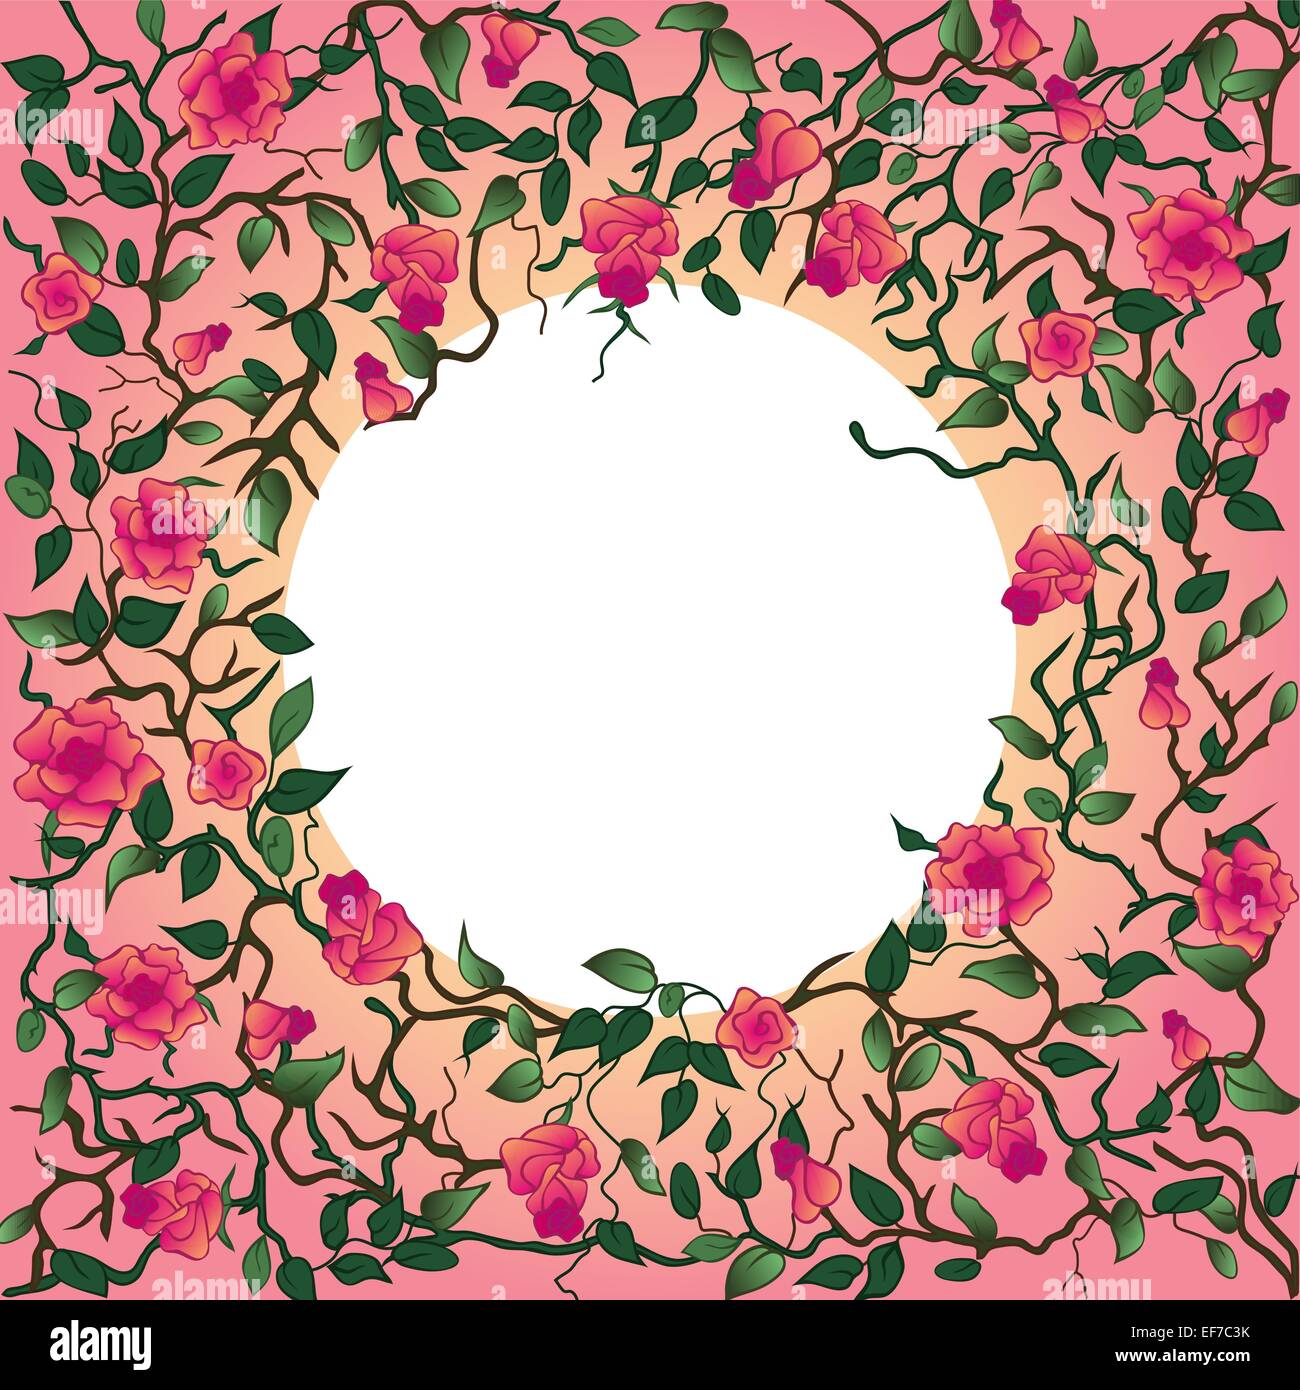 The text in the white circle framed with branches with roses and leaves on a pink background Stock Vector